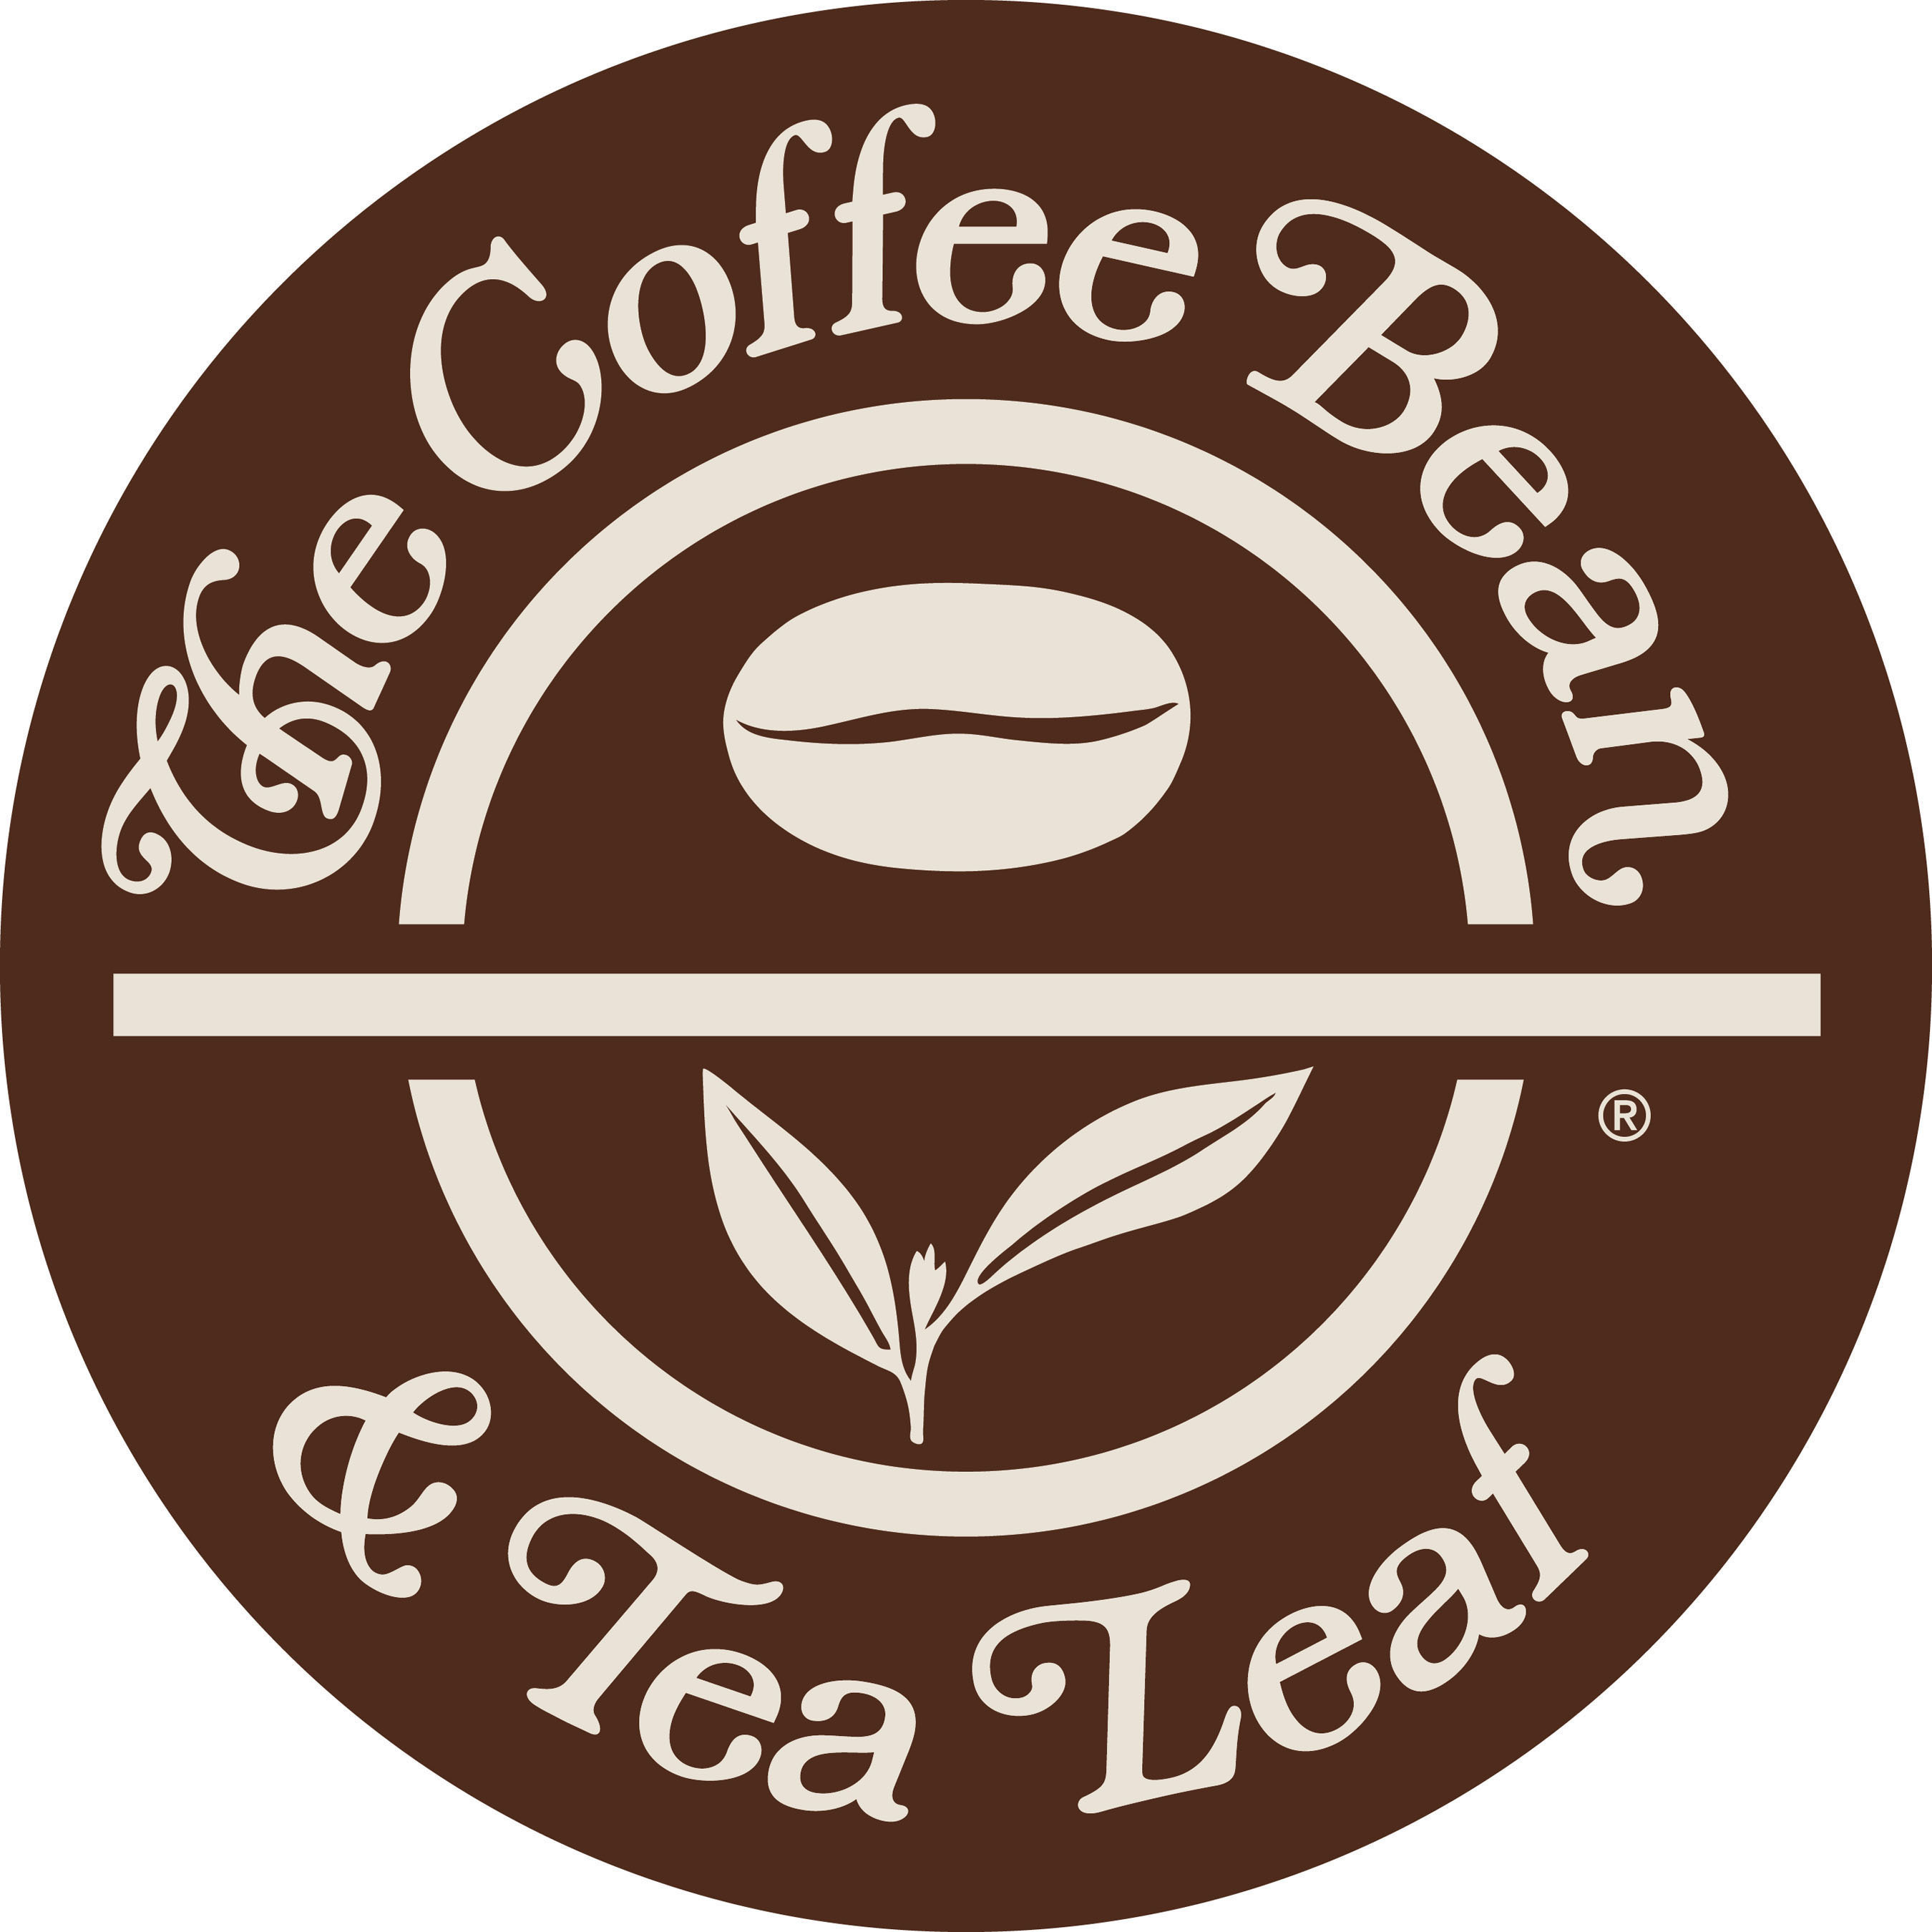 The Coffee Bean And Tea Leaf Backgrounds on Wallpapers Vista